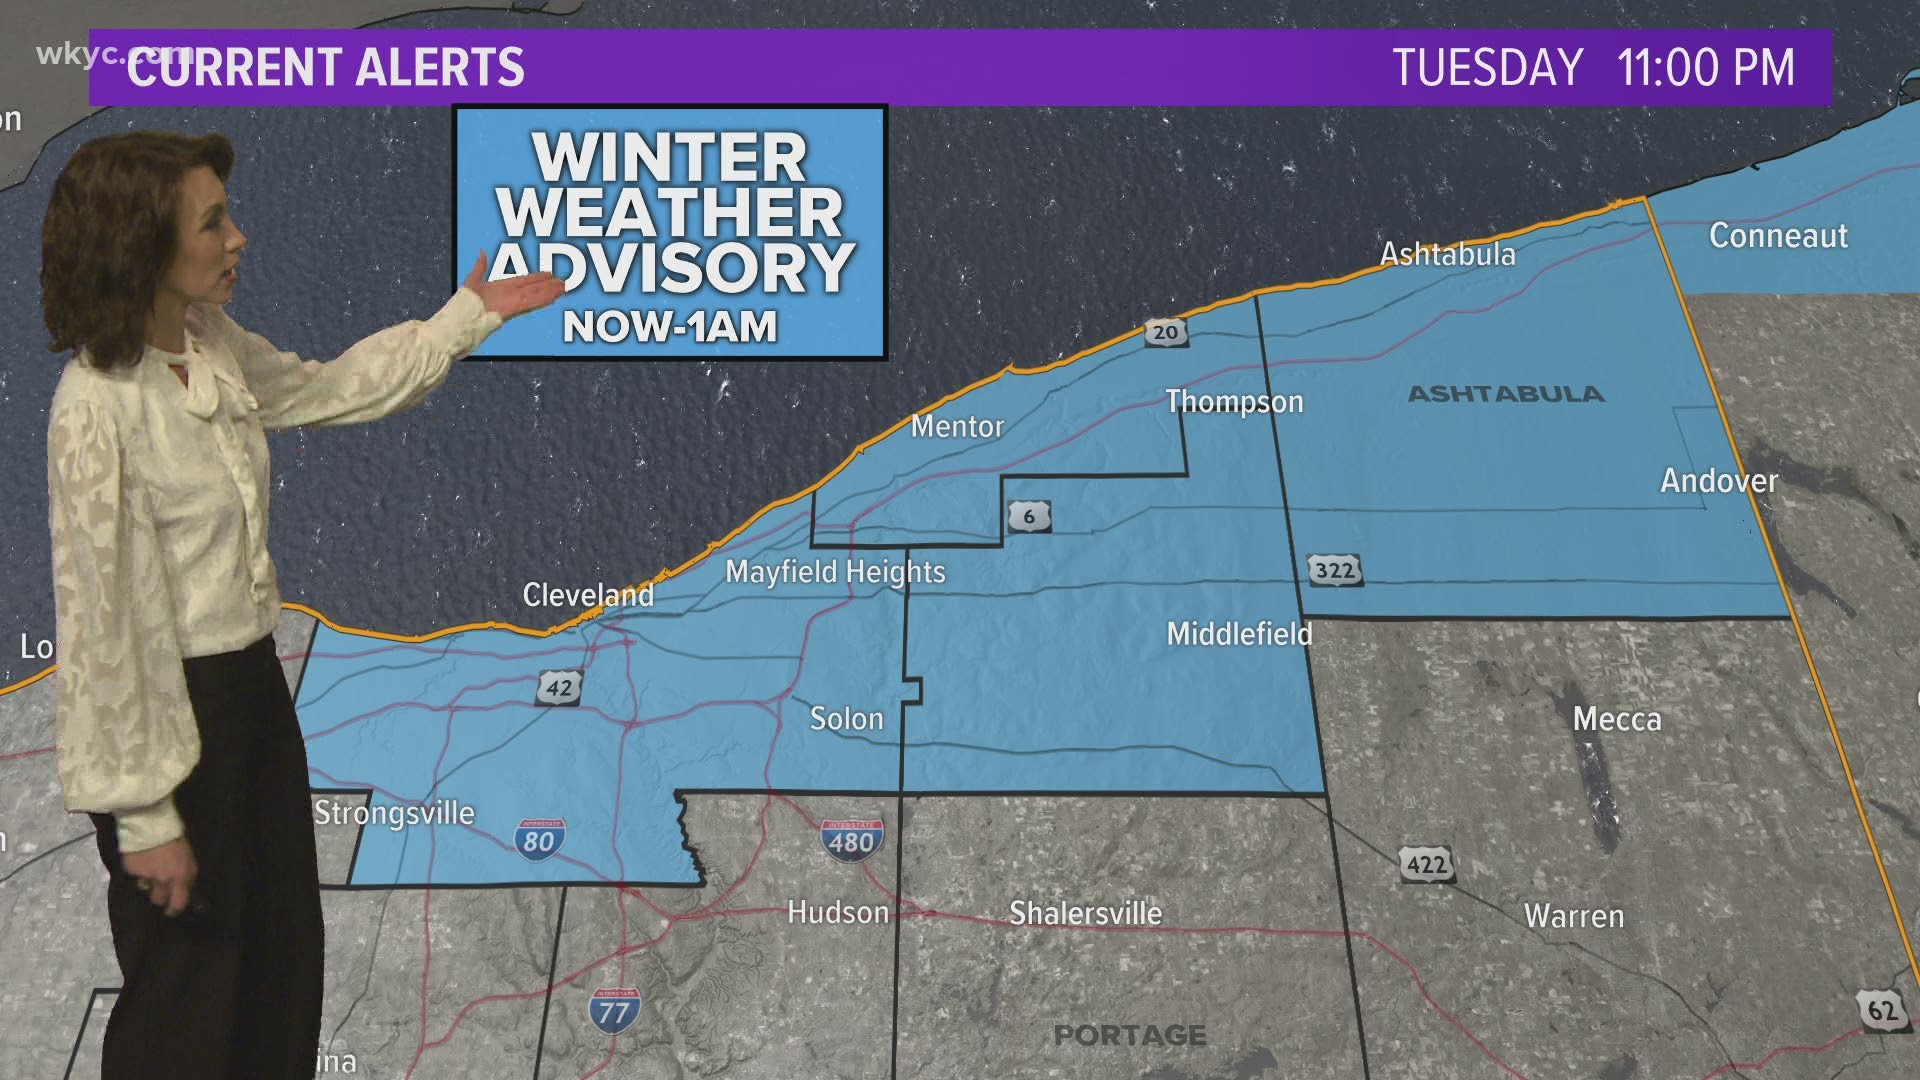 The advisory is in effect until 1 a.m. on Wednesday. Betsy Kling tells us what to expect.